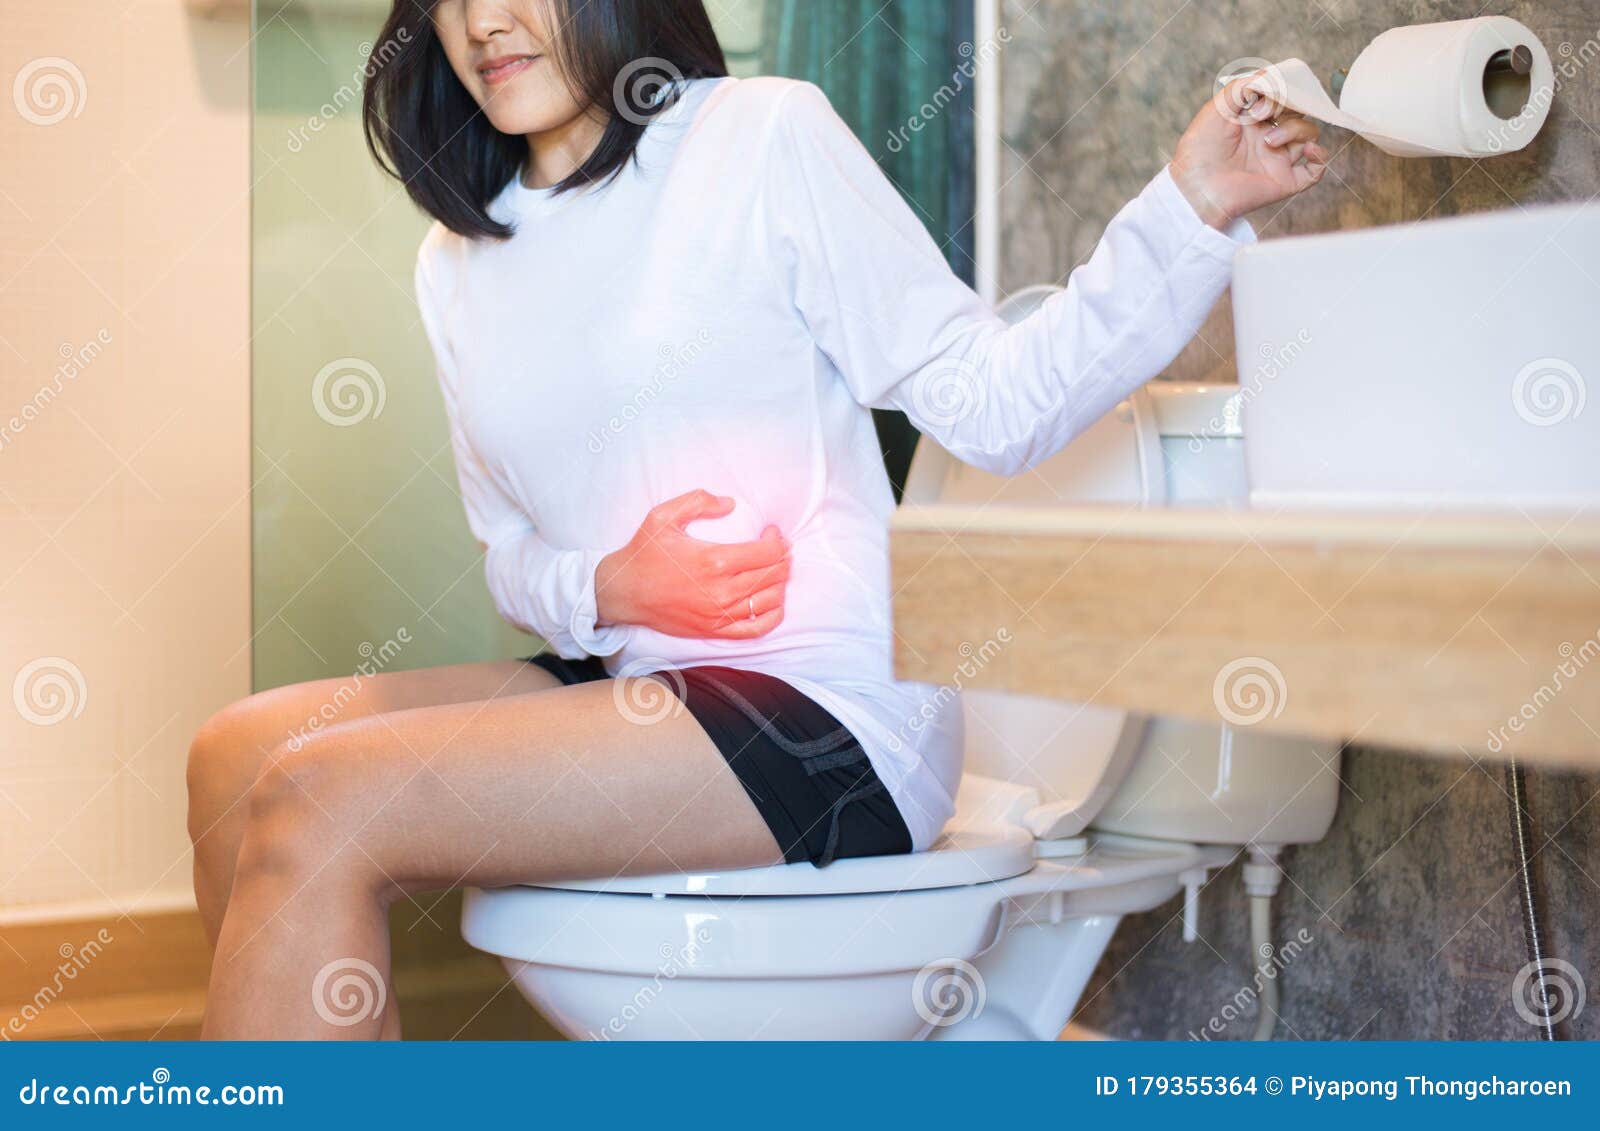 Asian Woman Sufferring With Hemorrhoids Or Constipation In Toil